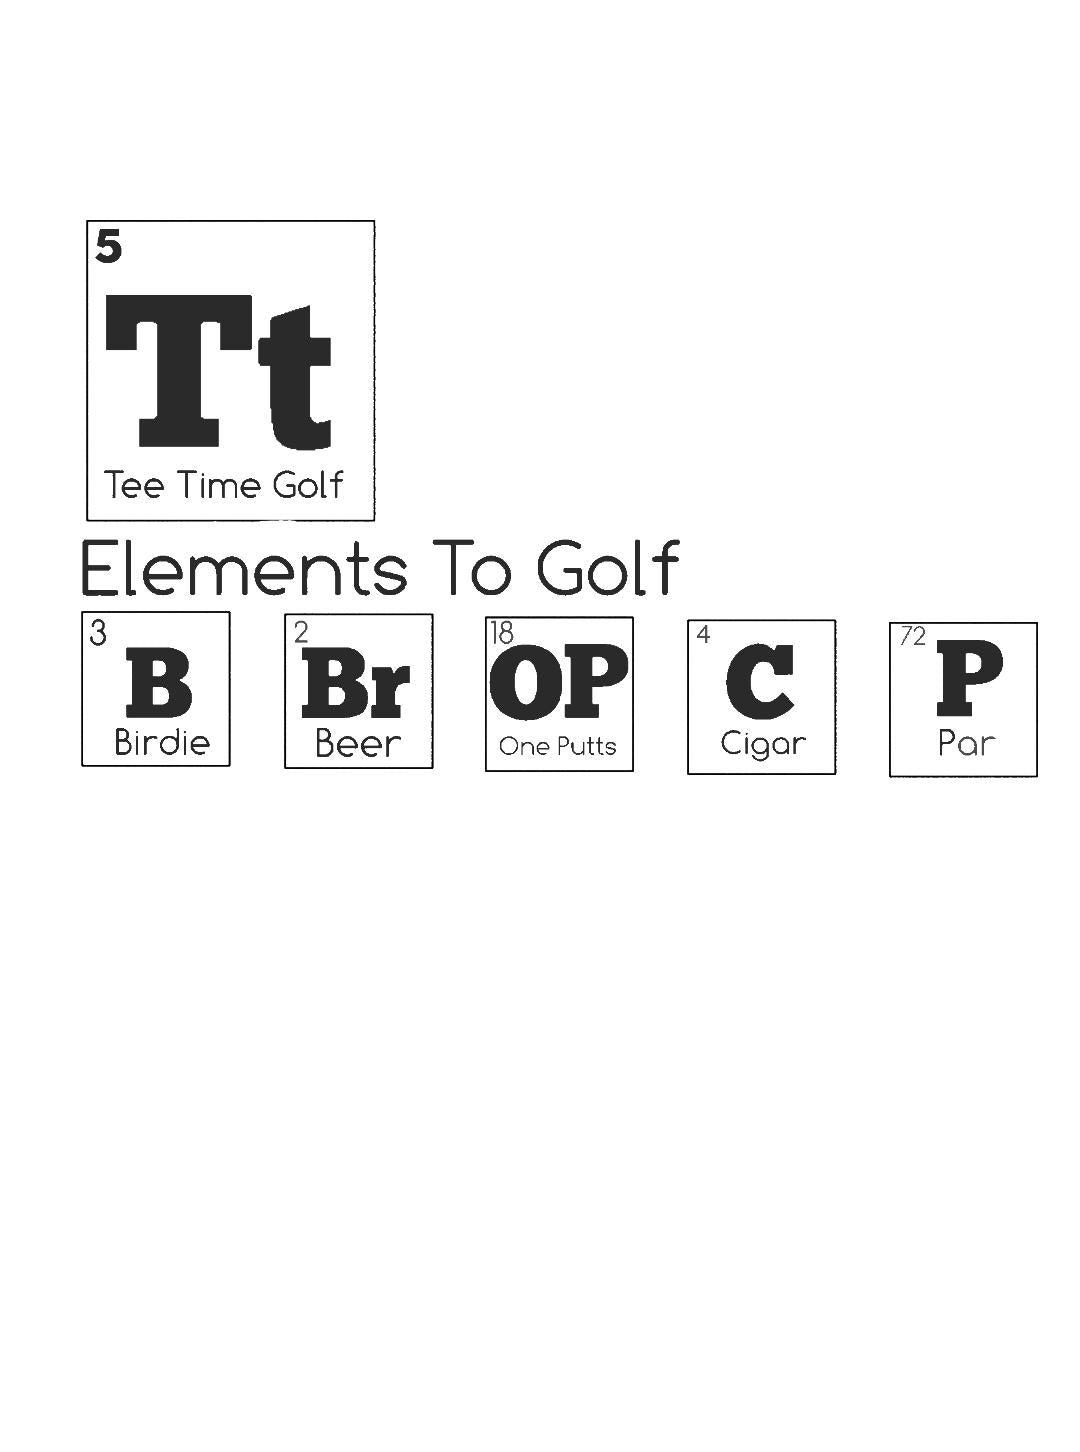 Elements of Golf